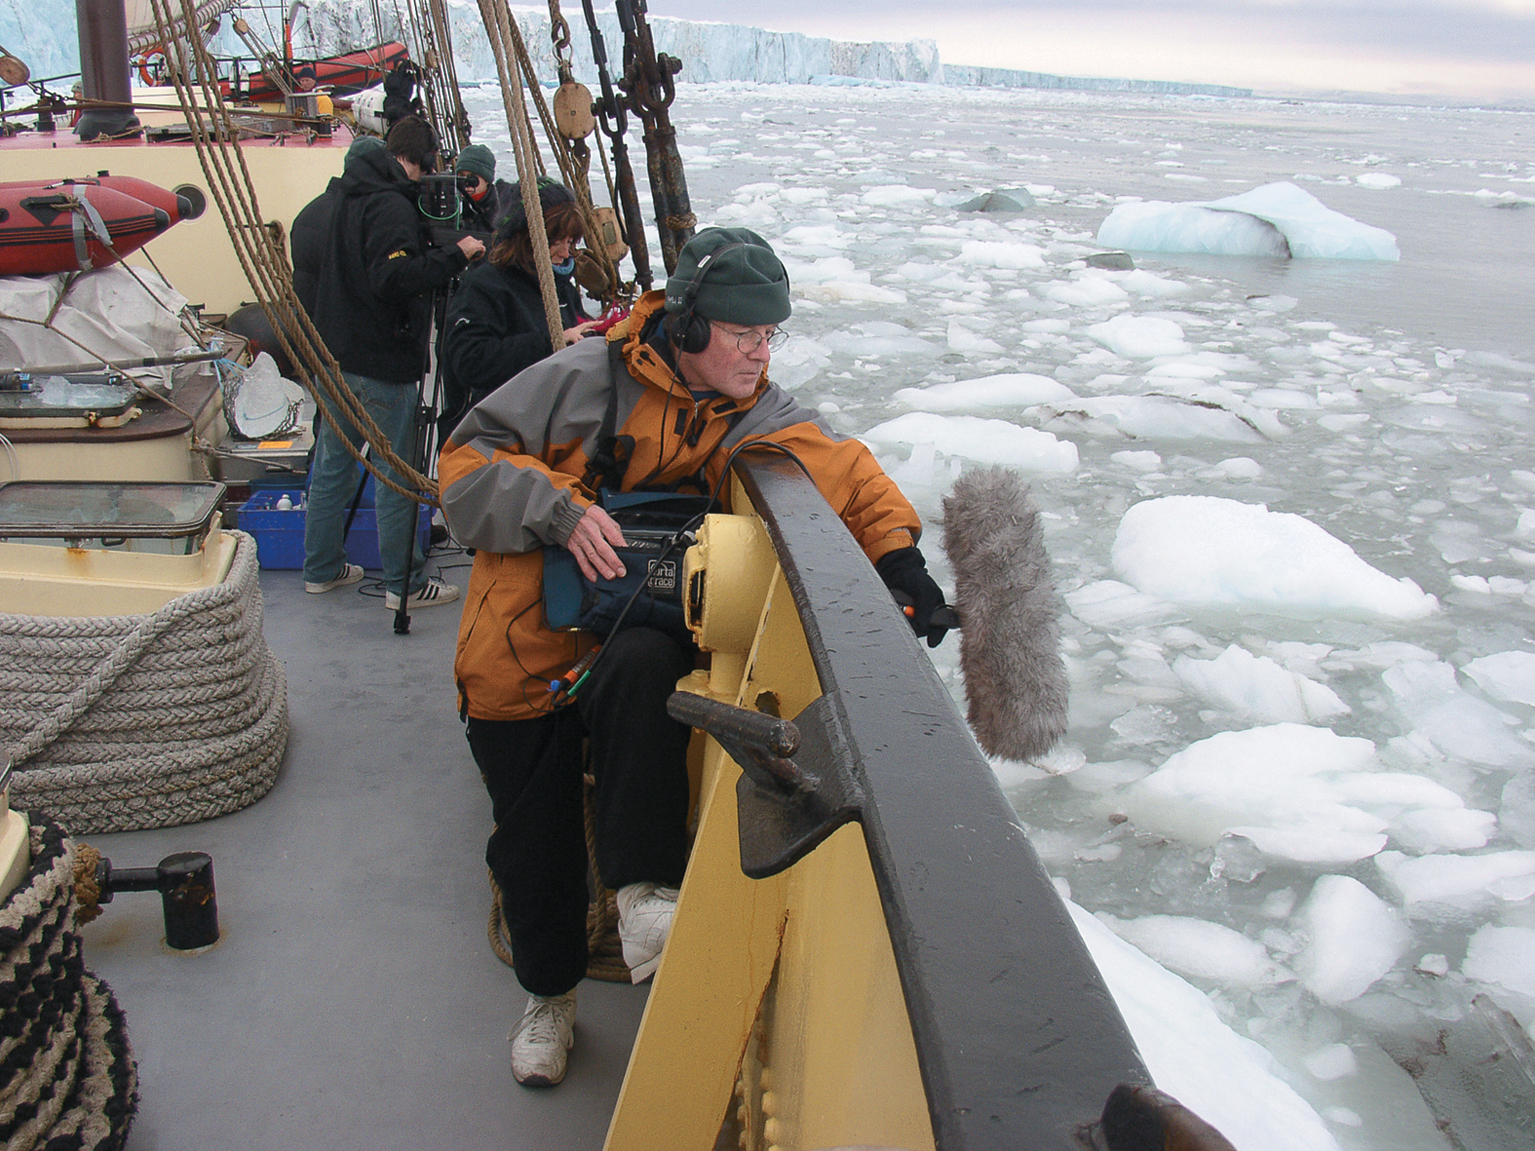 recording sound on a boat in the Arctic